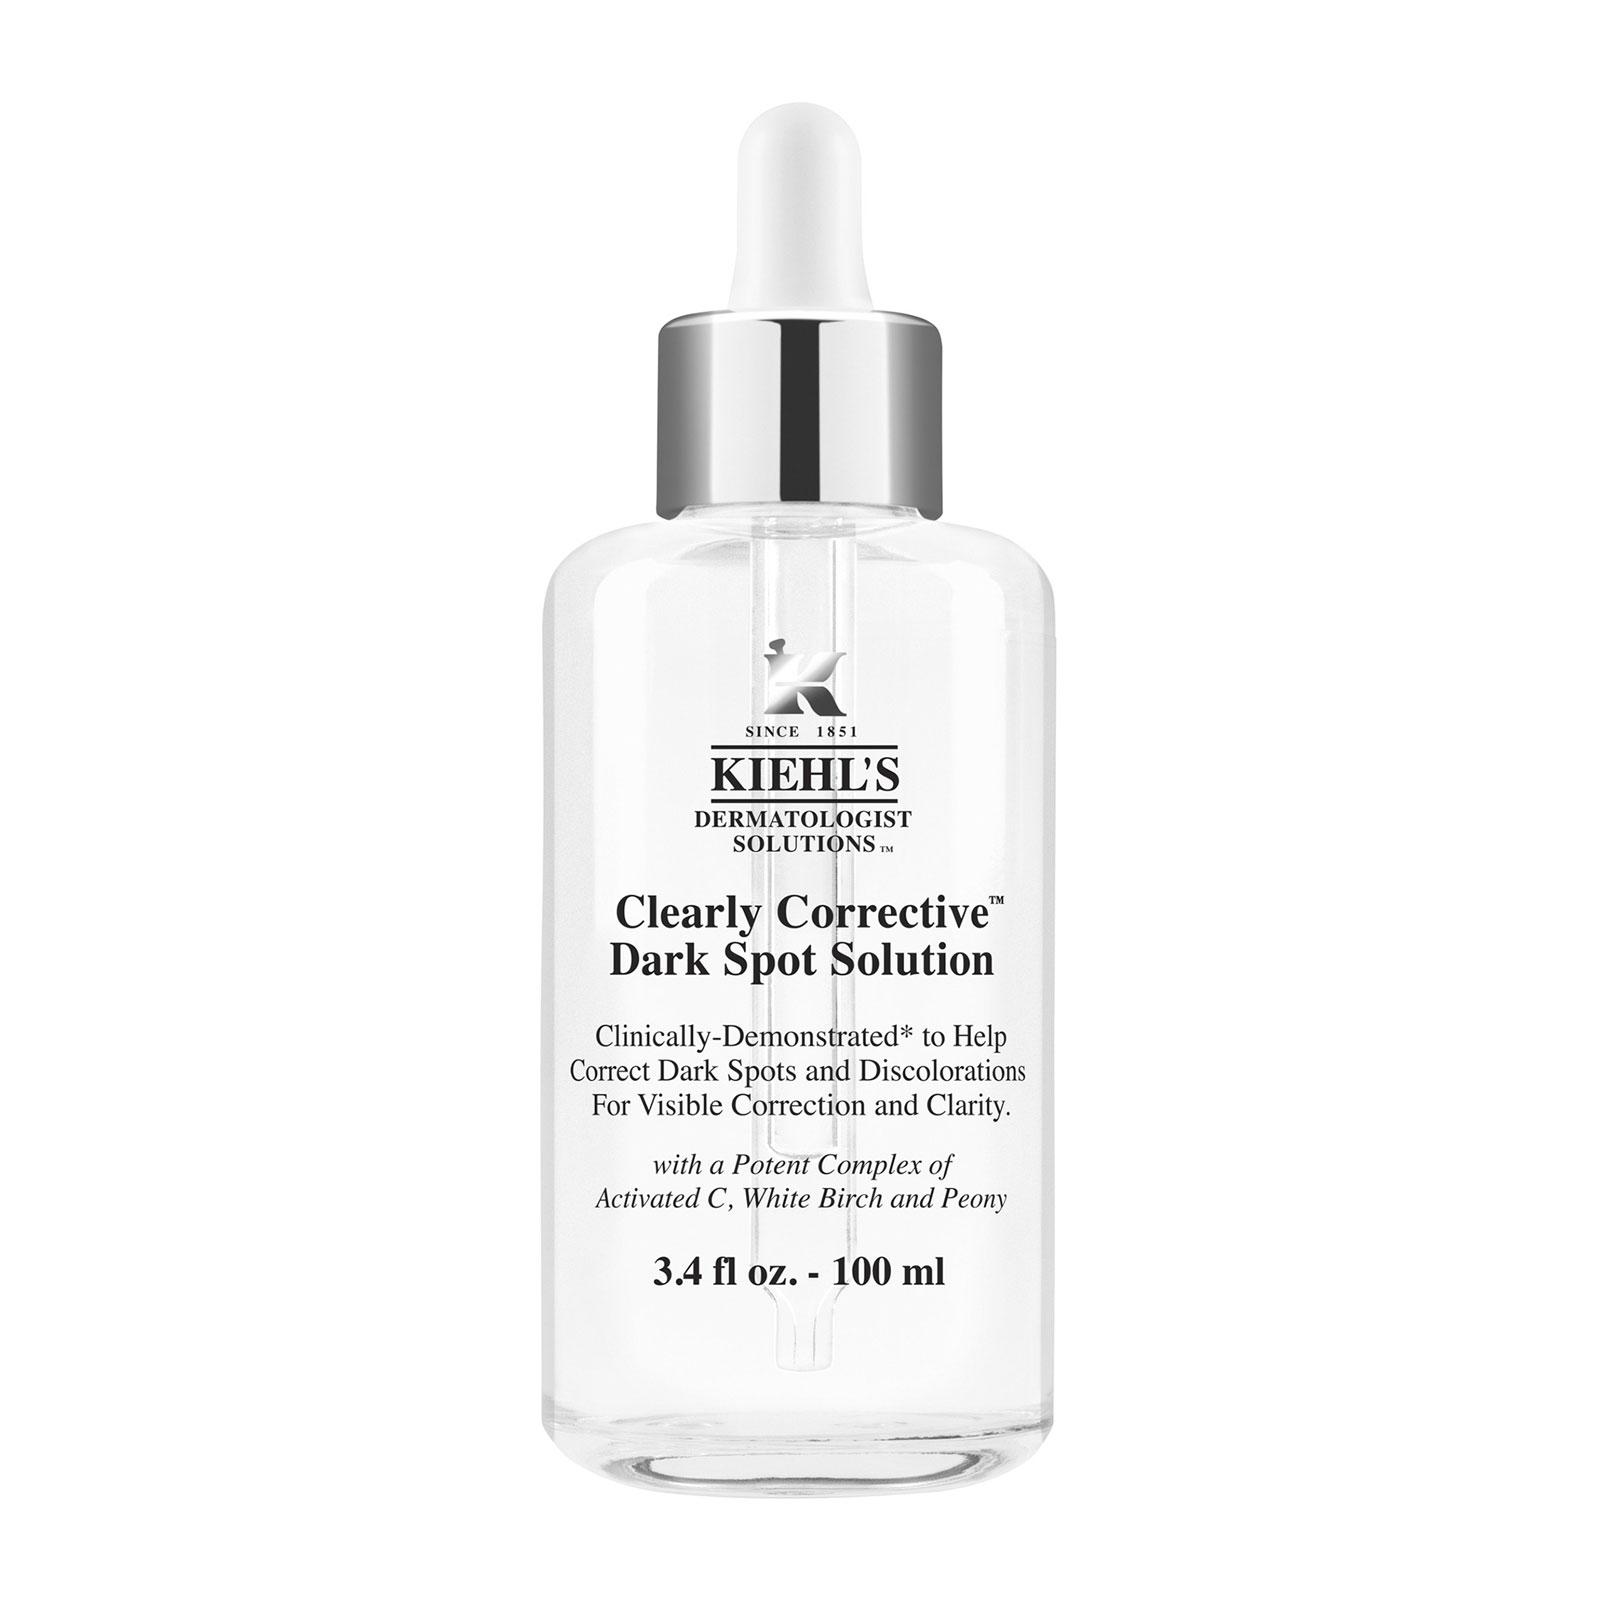 Kiehl's Clearly Corrective Dark Spot Solution 100ml £81.60 at Feelunique